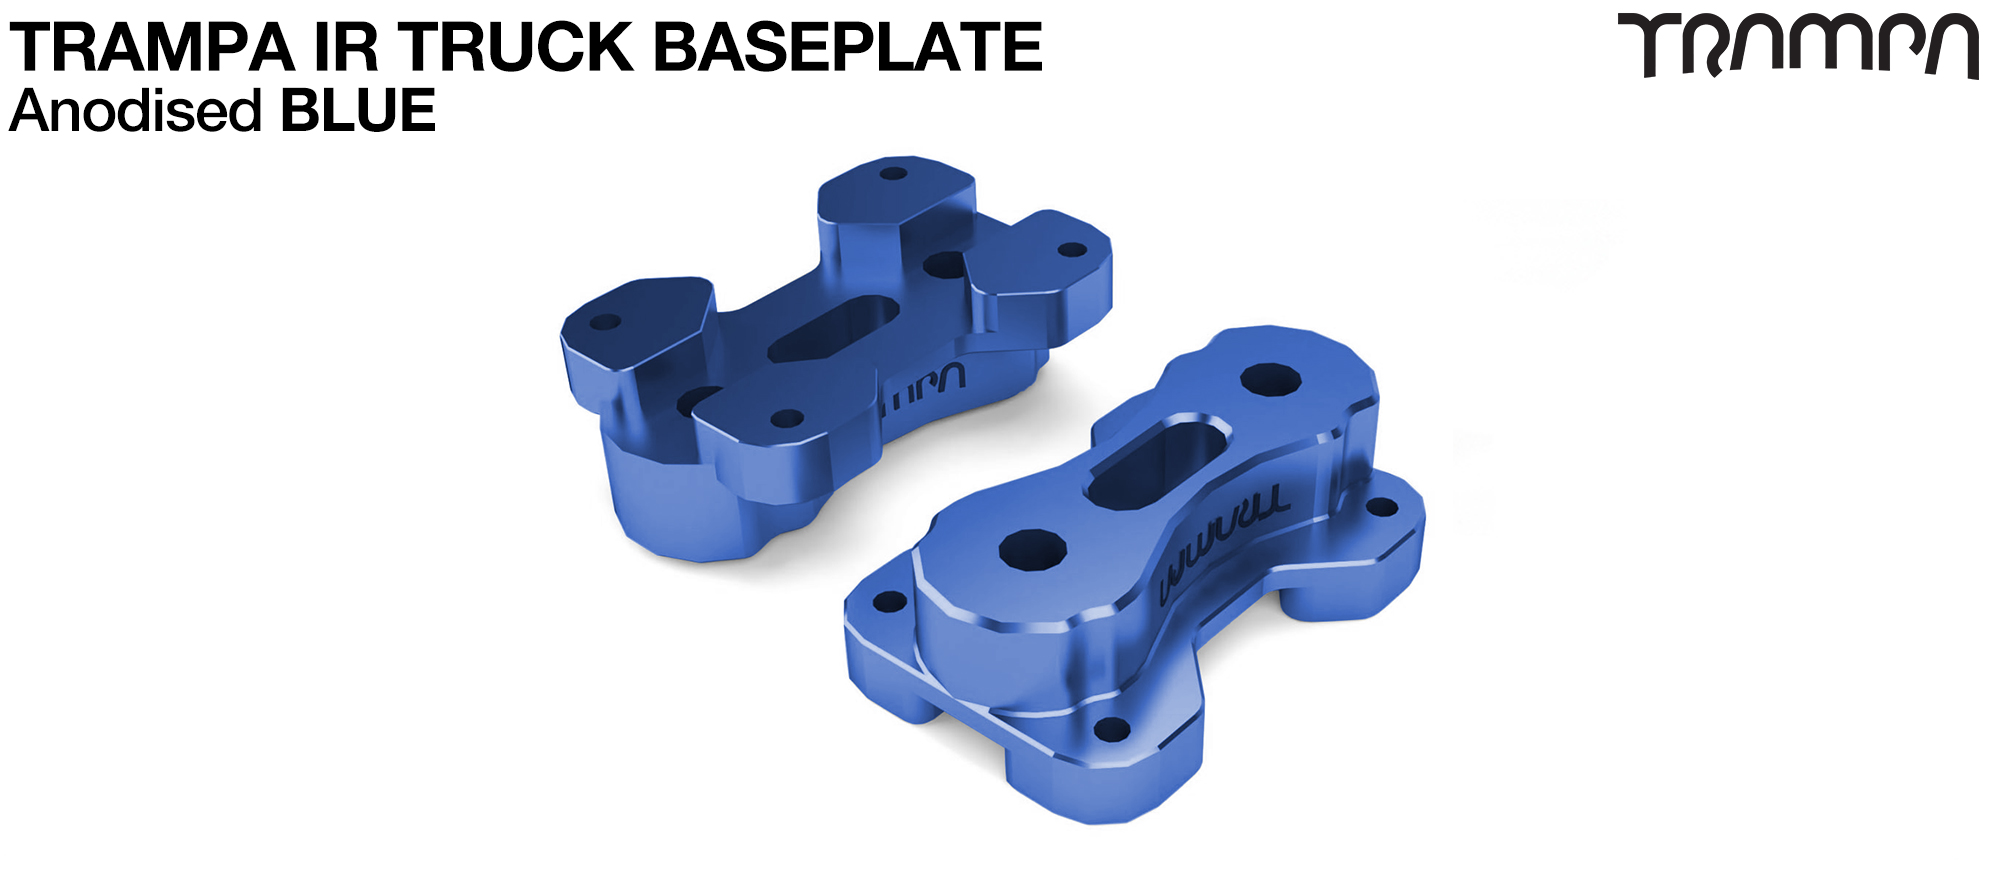 TRAMPA IR BASEPLATE - CNC Precision made TRAMPA IR Trucks are super light & Packed with performance - BLUE